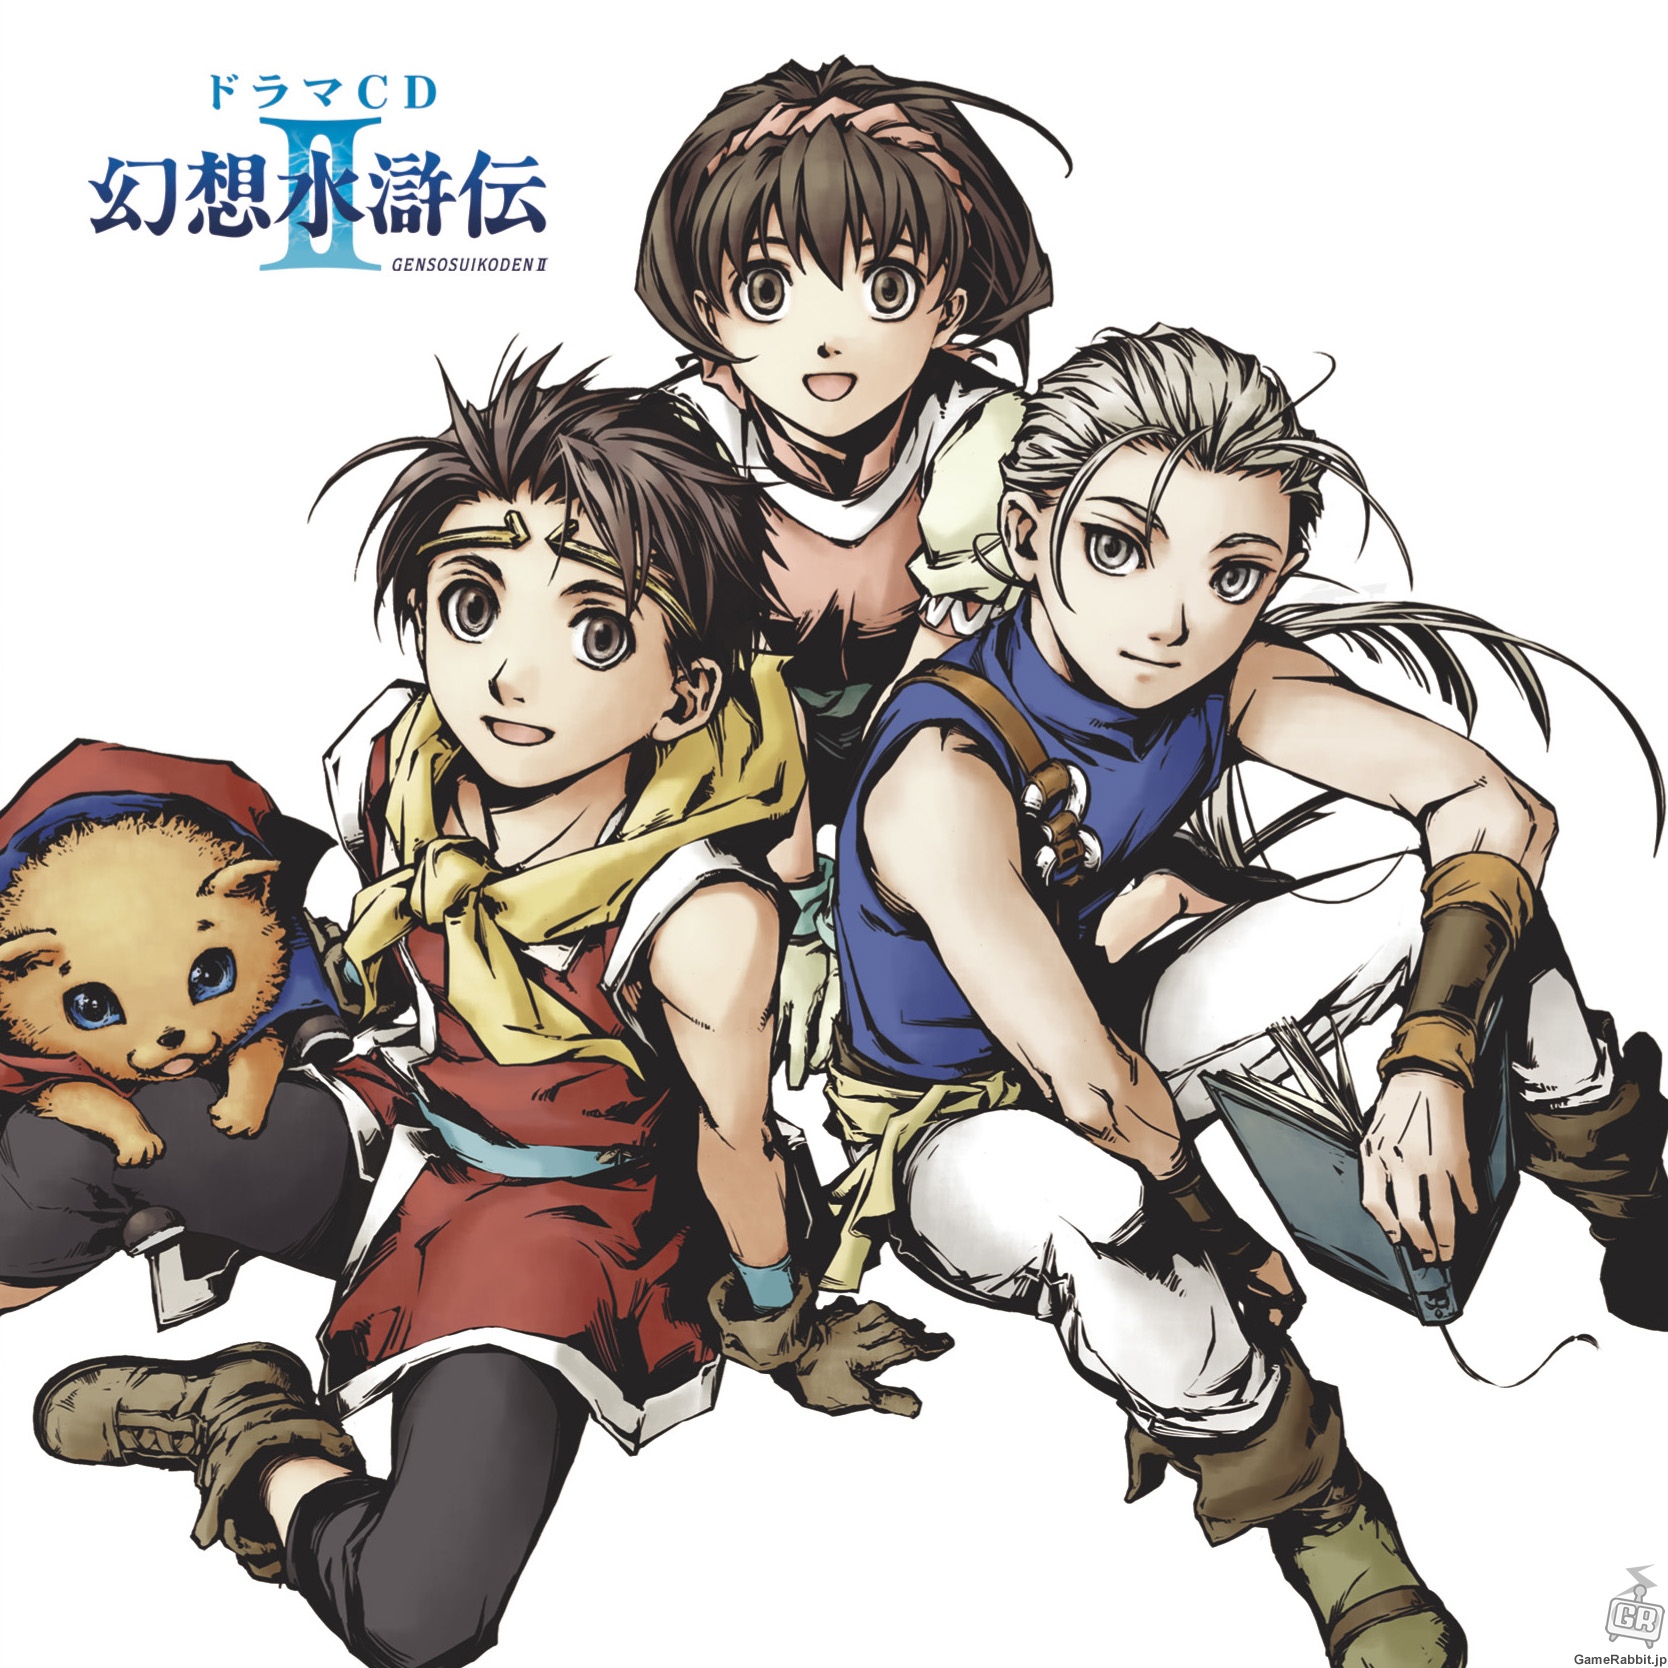 Genso-suikoden